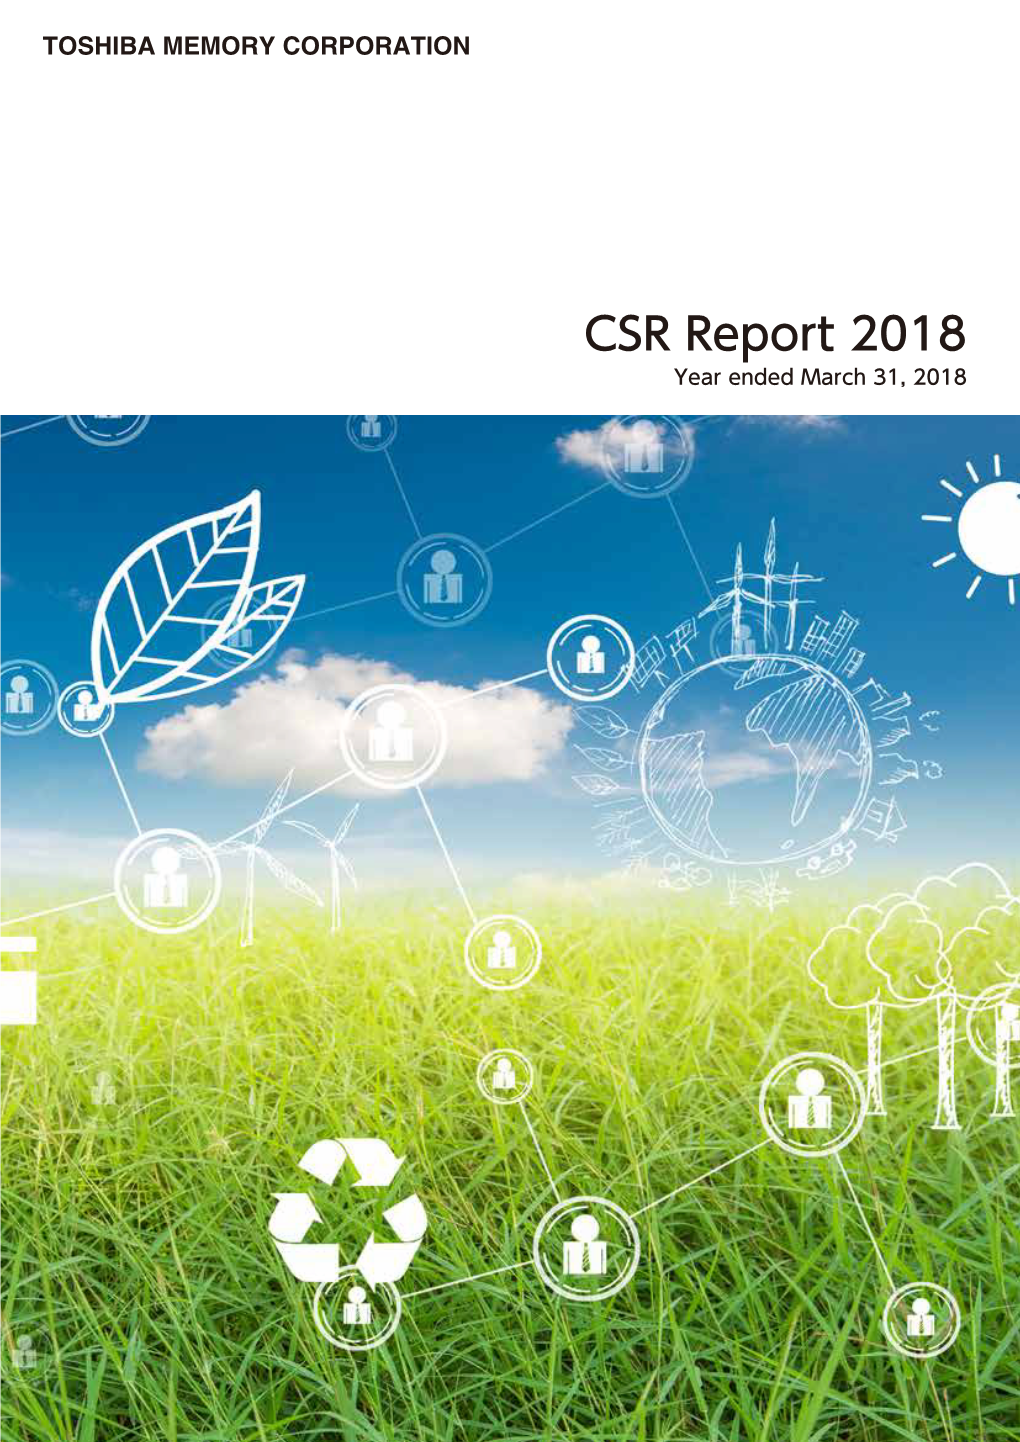 CSR Report, Year Ended March 31, 2018